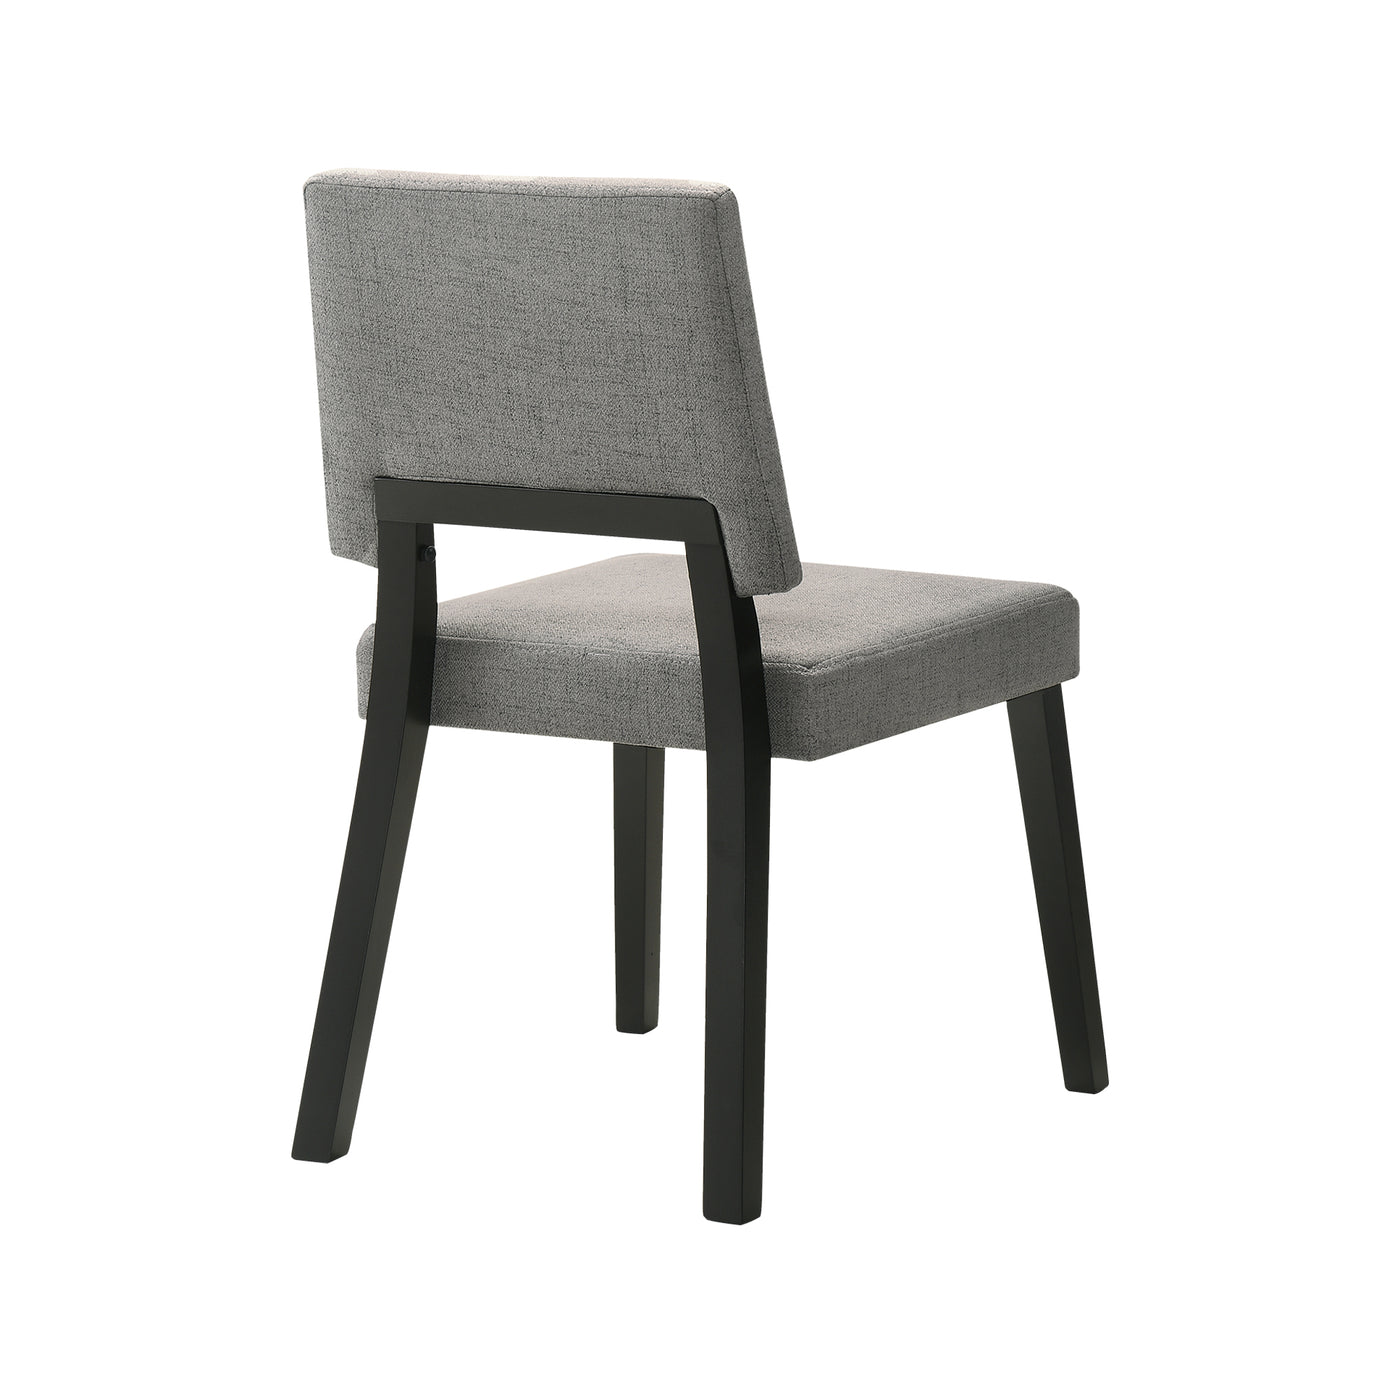 Channell Upholstered Wood Dining Chair - Set of 2